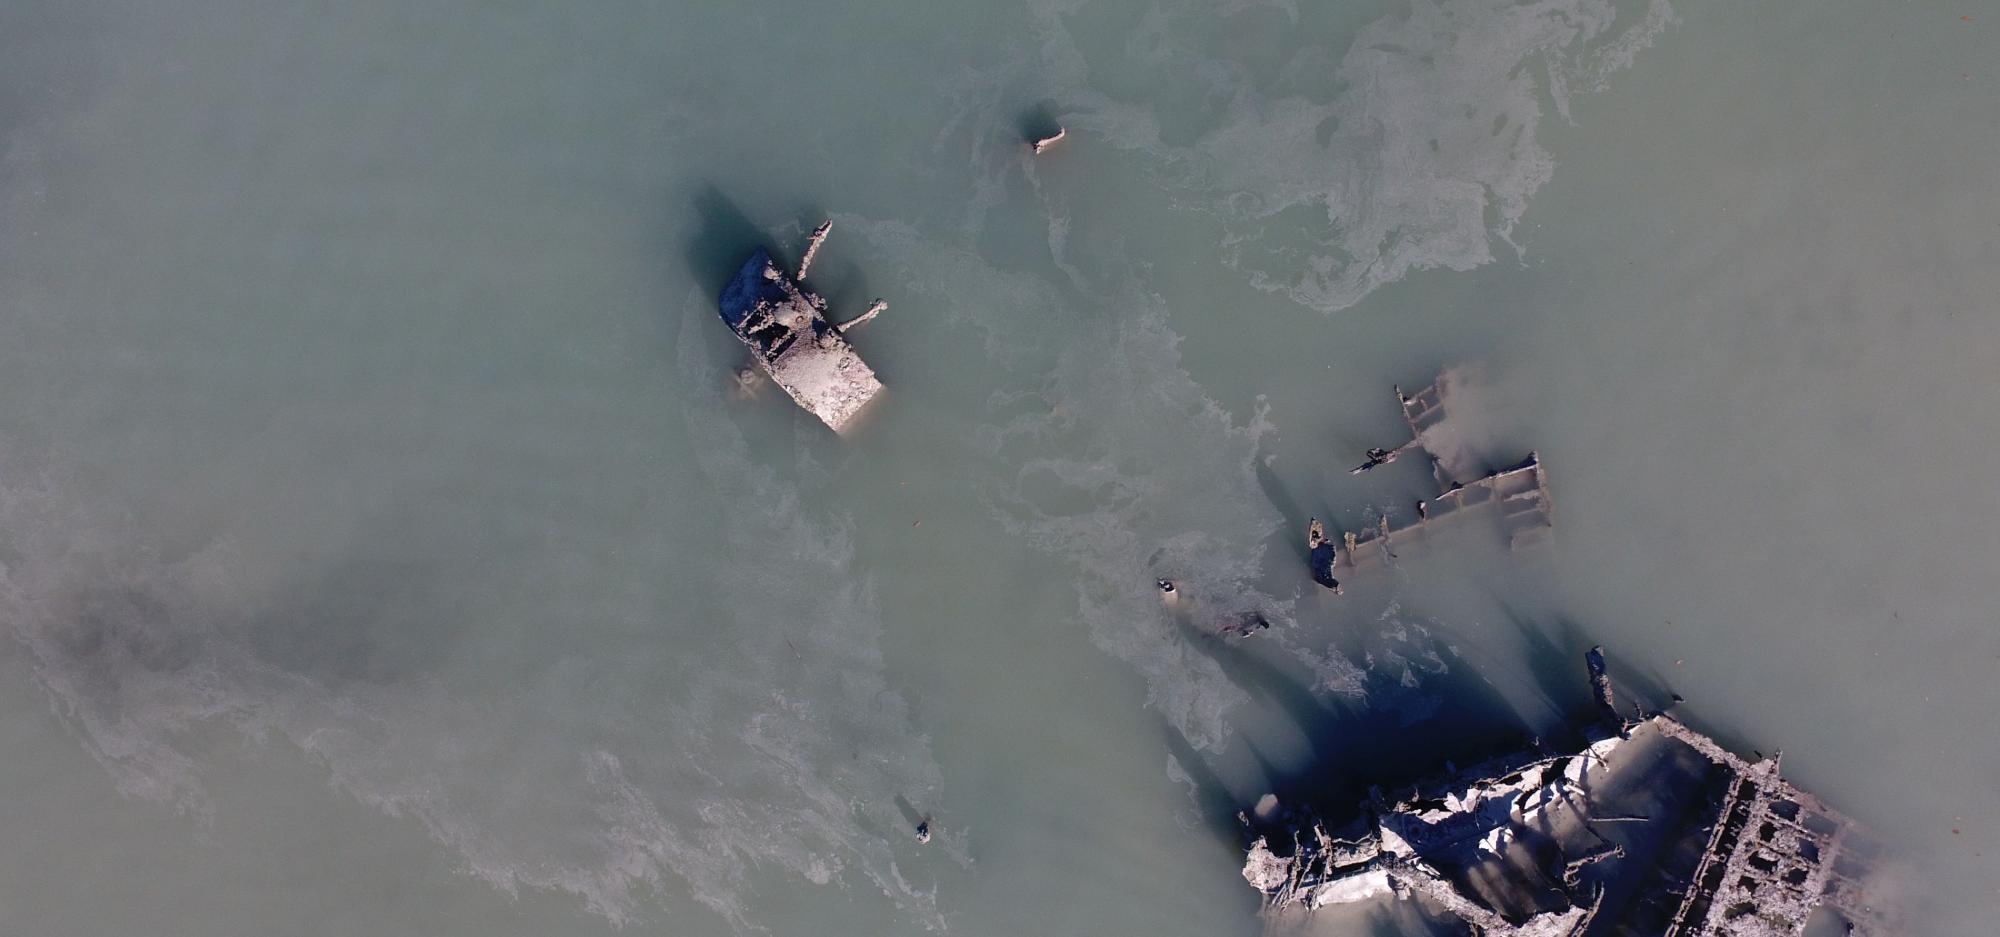 Looking down on parts of aircraft wreckage in shallow water.